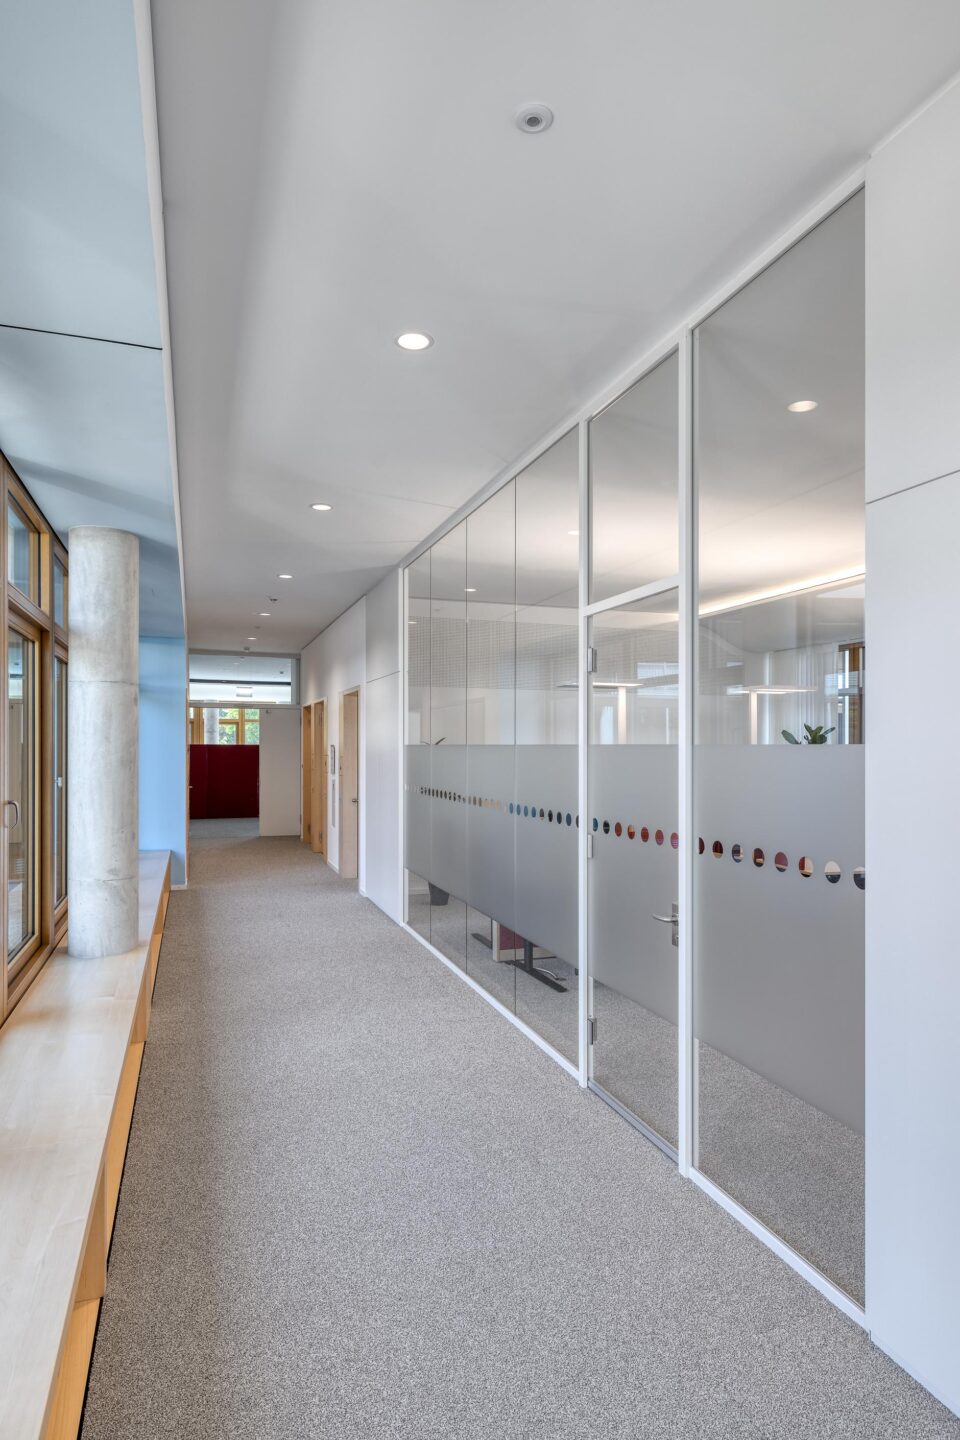 dm-dialogicum Karlsruhe │ system partitions walls │ all-glass construction